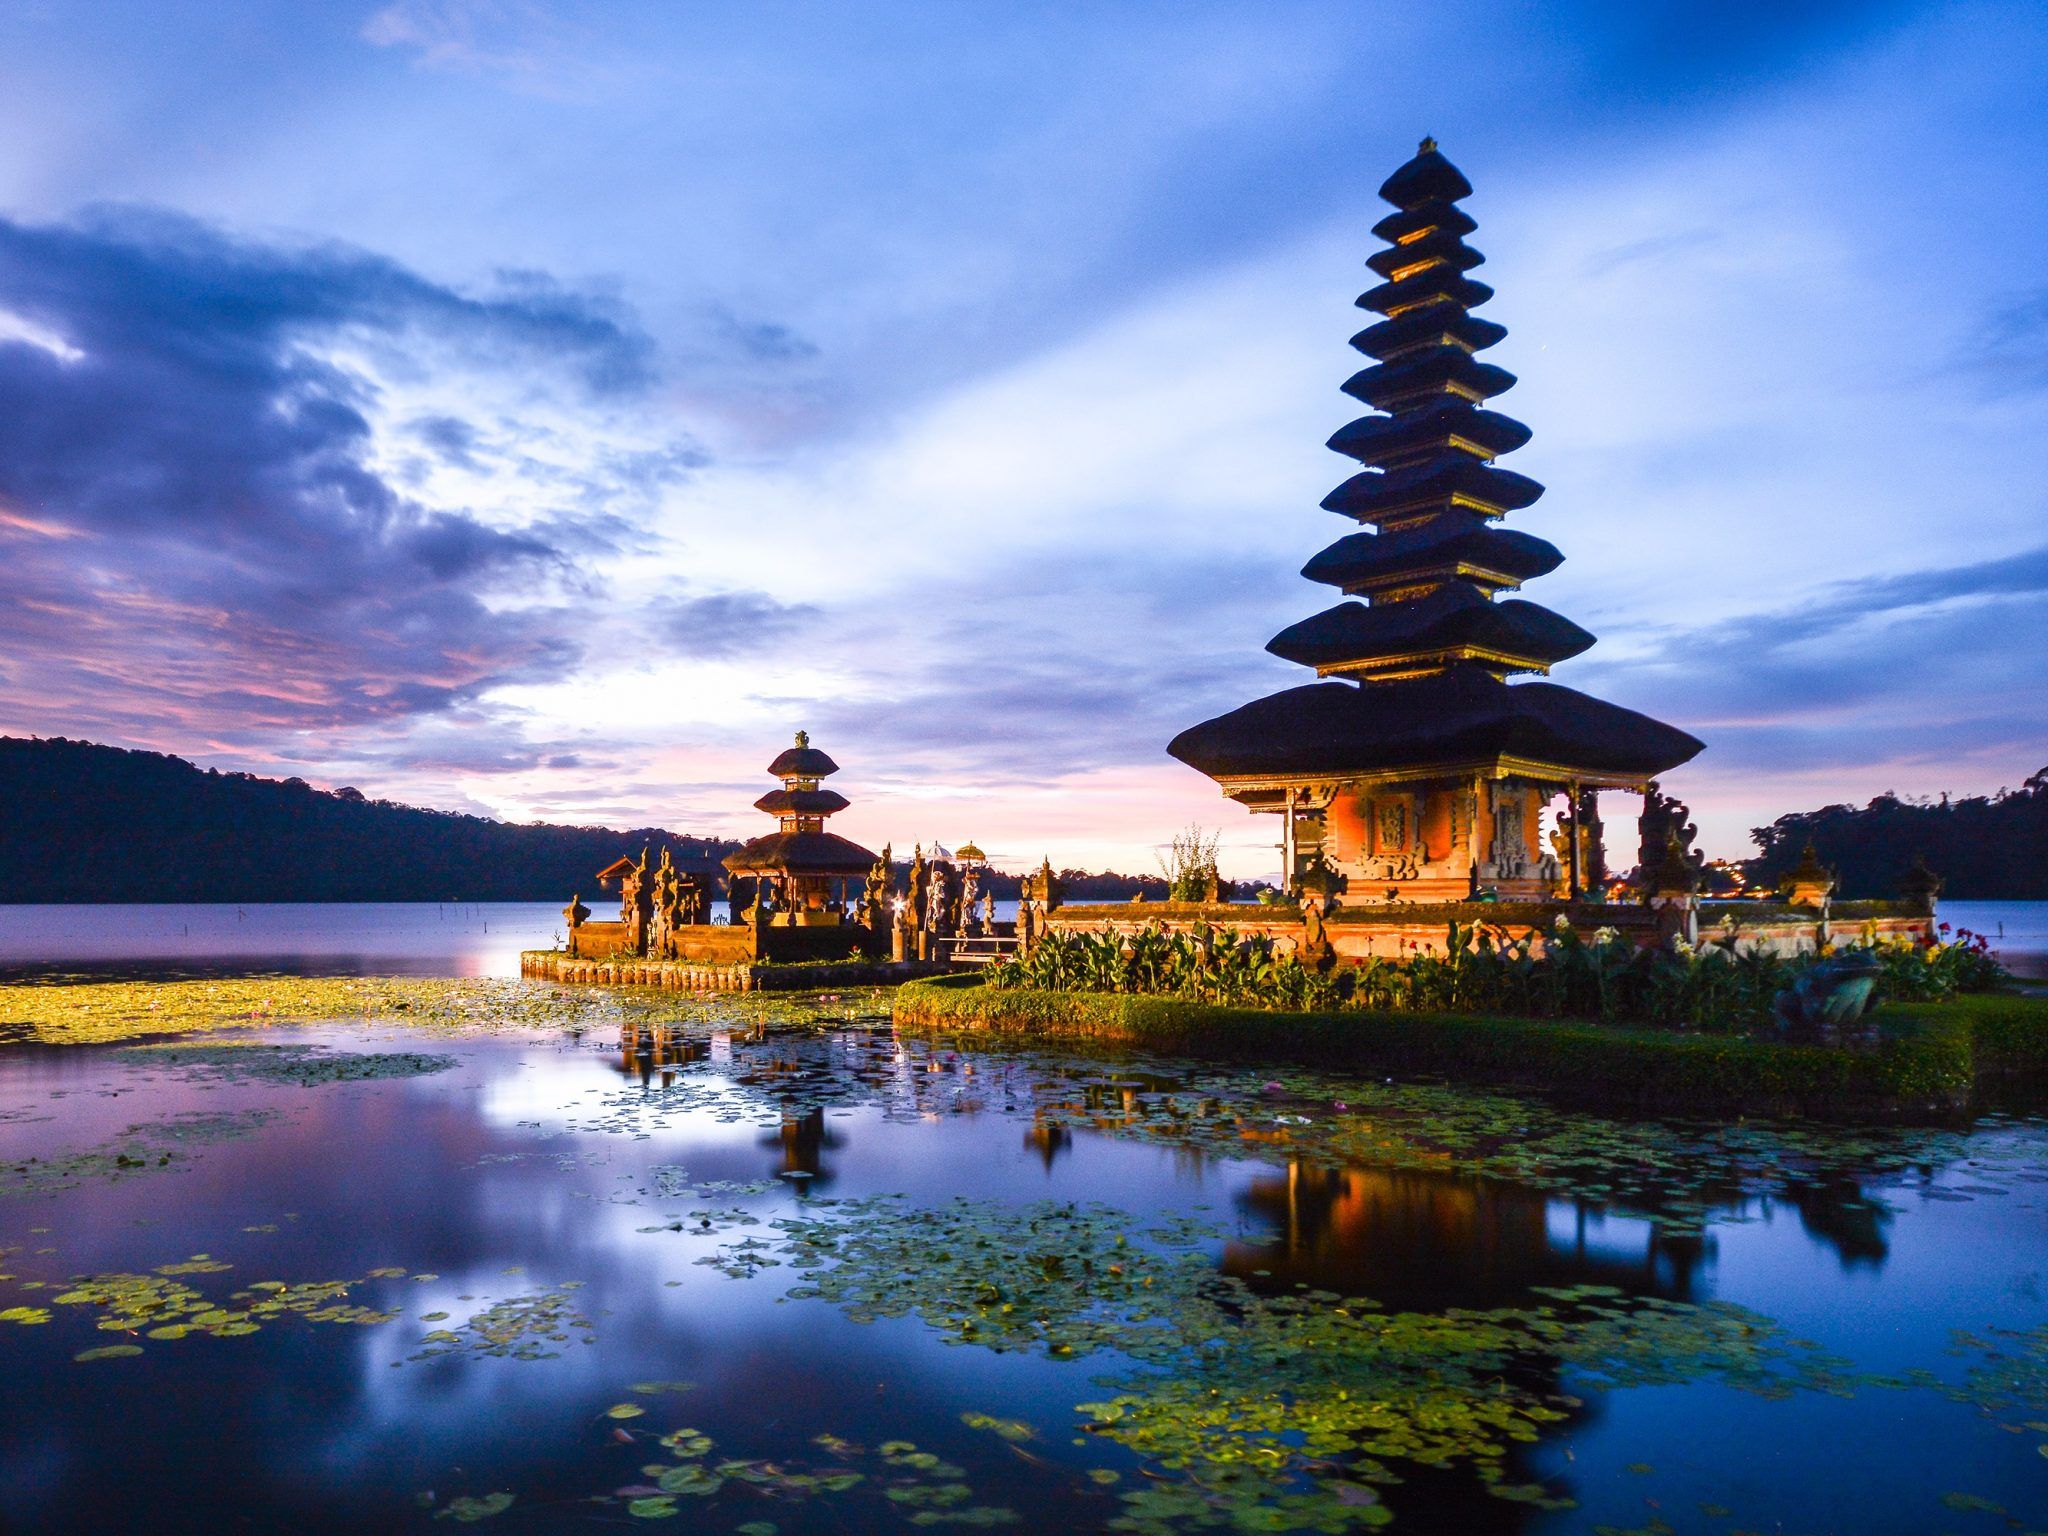 Indonesia: one stop for the perfect adventure